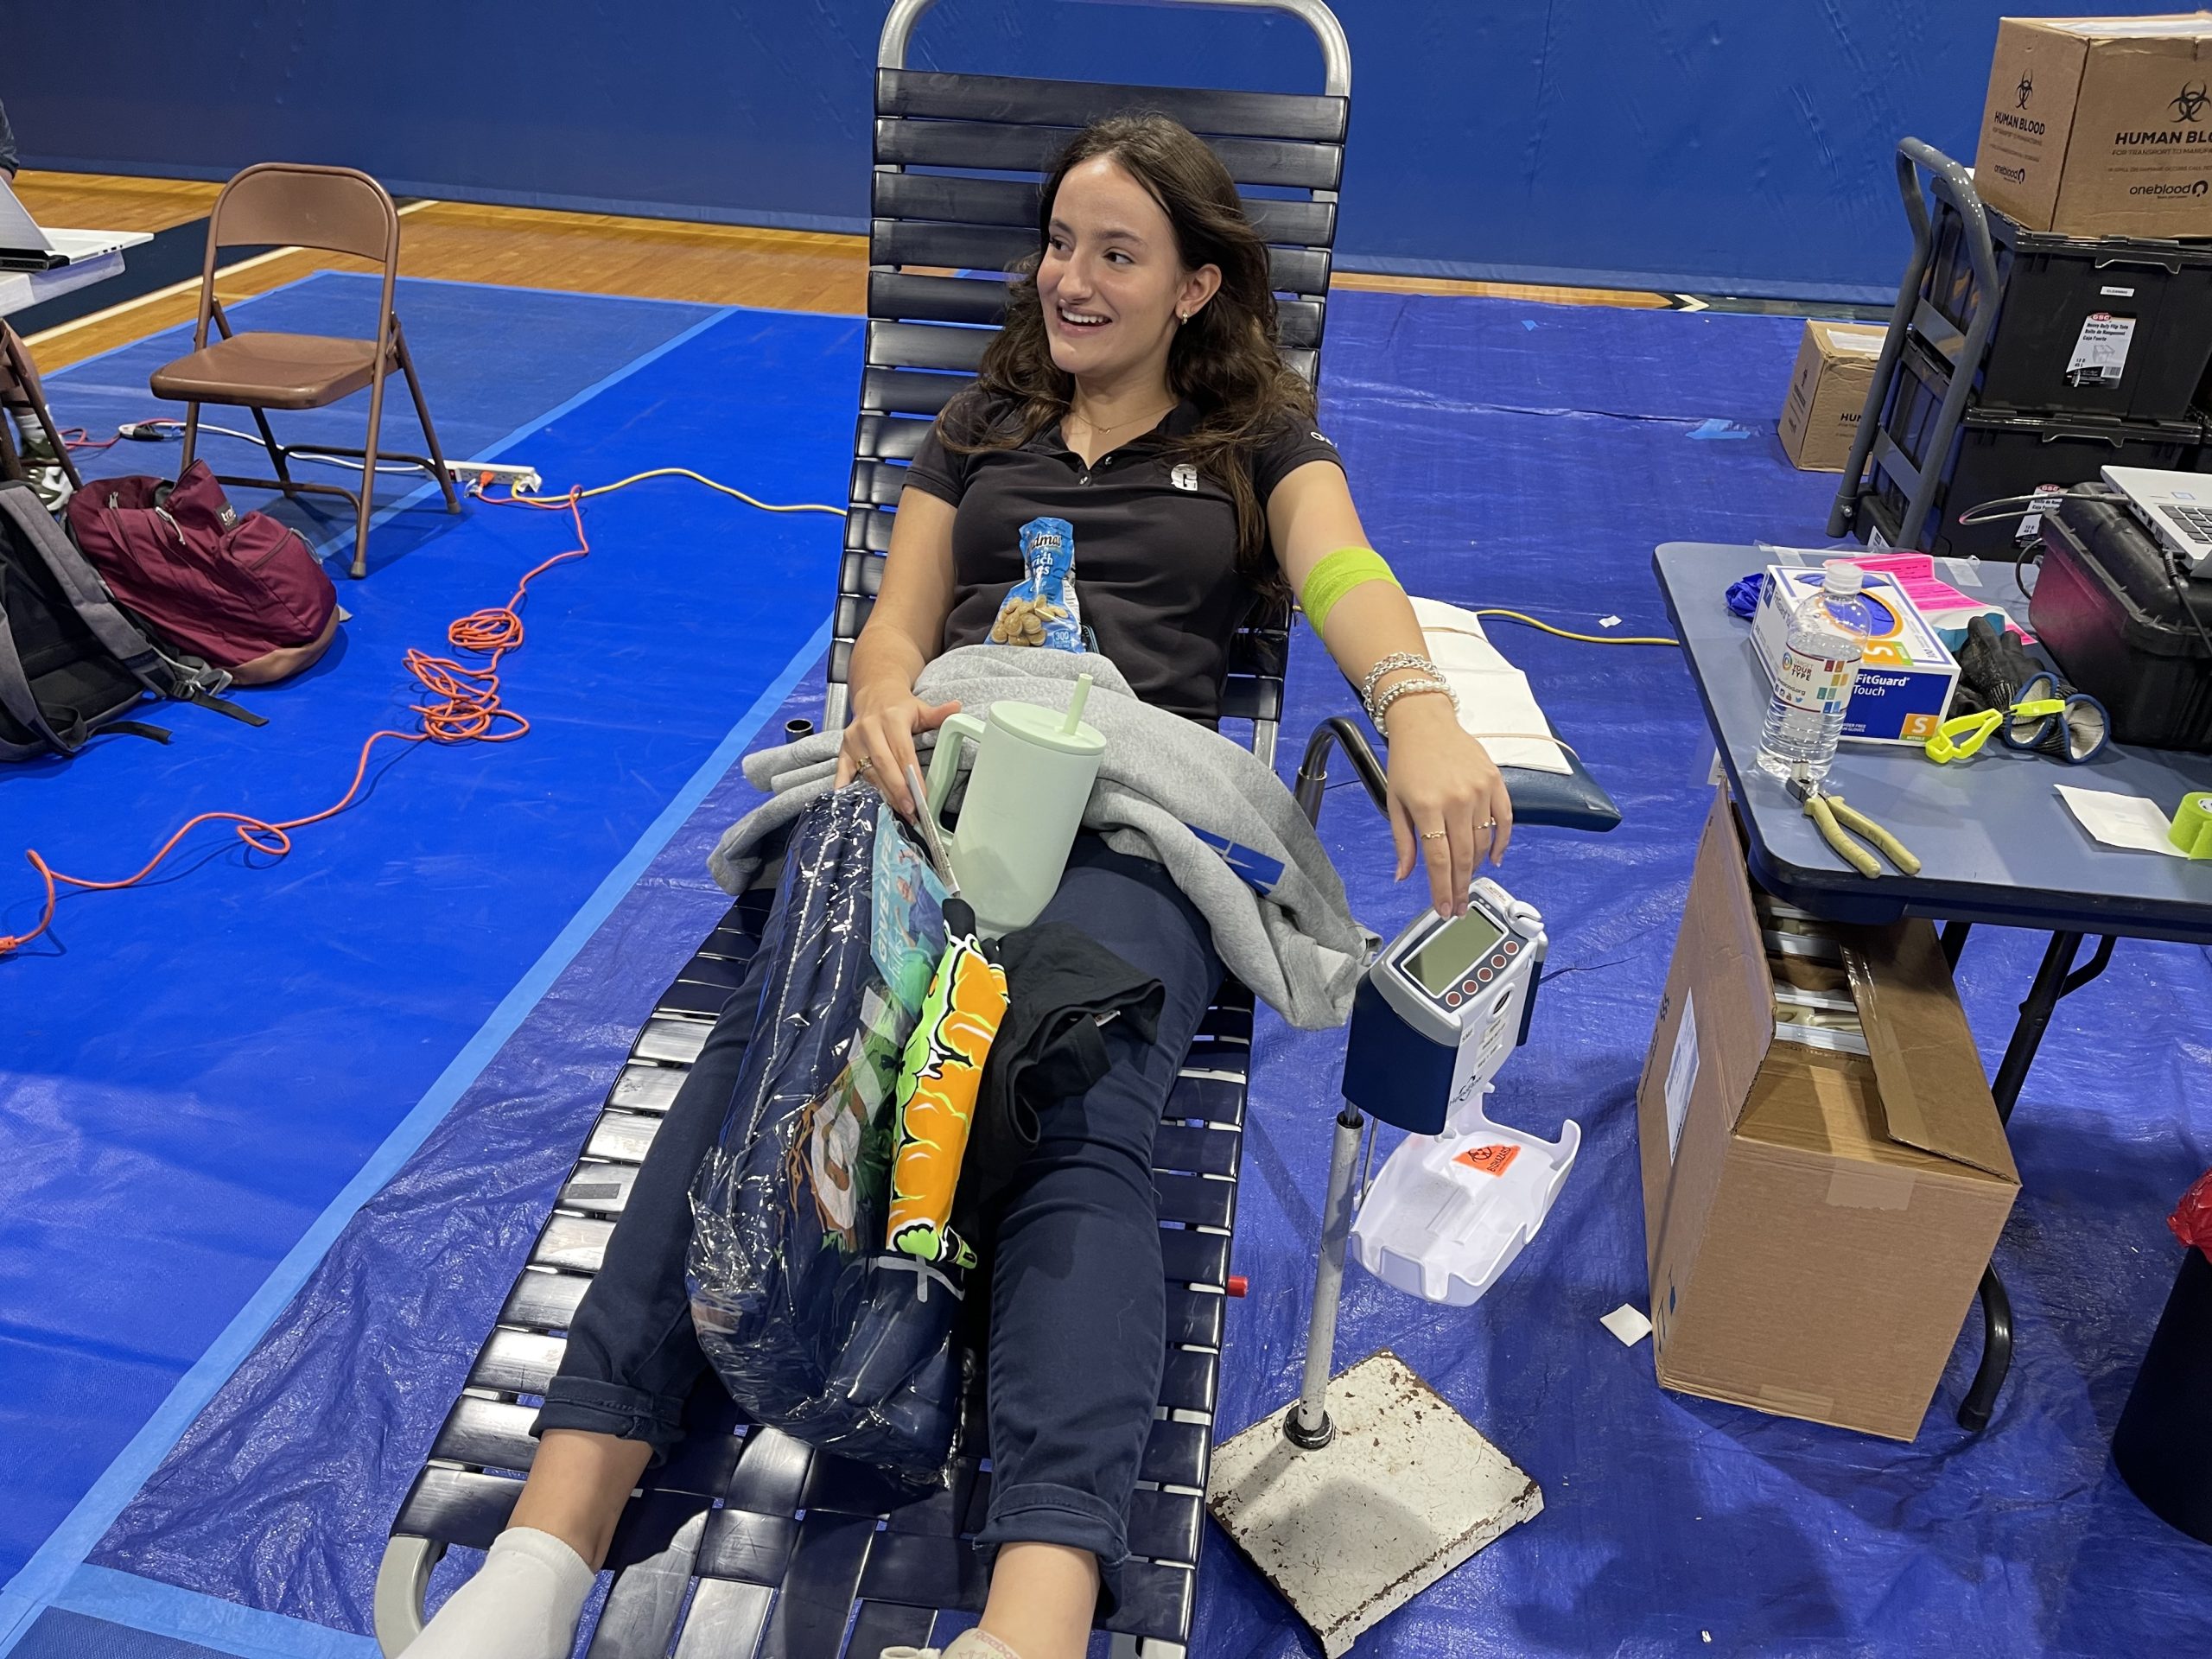 Junior student donor Caterina Frascolla donates her blood to OneBlood. She was ineligible to donate platelets but still wanted to help in any way she could. She had to wait 10 minutes after donating so she could rest.